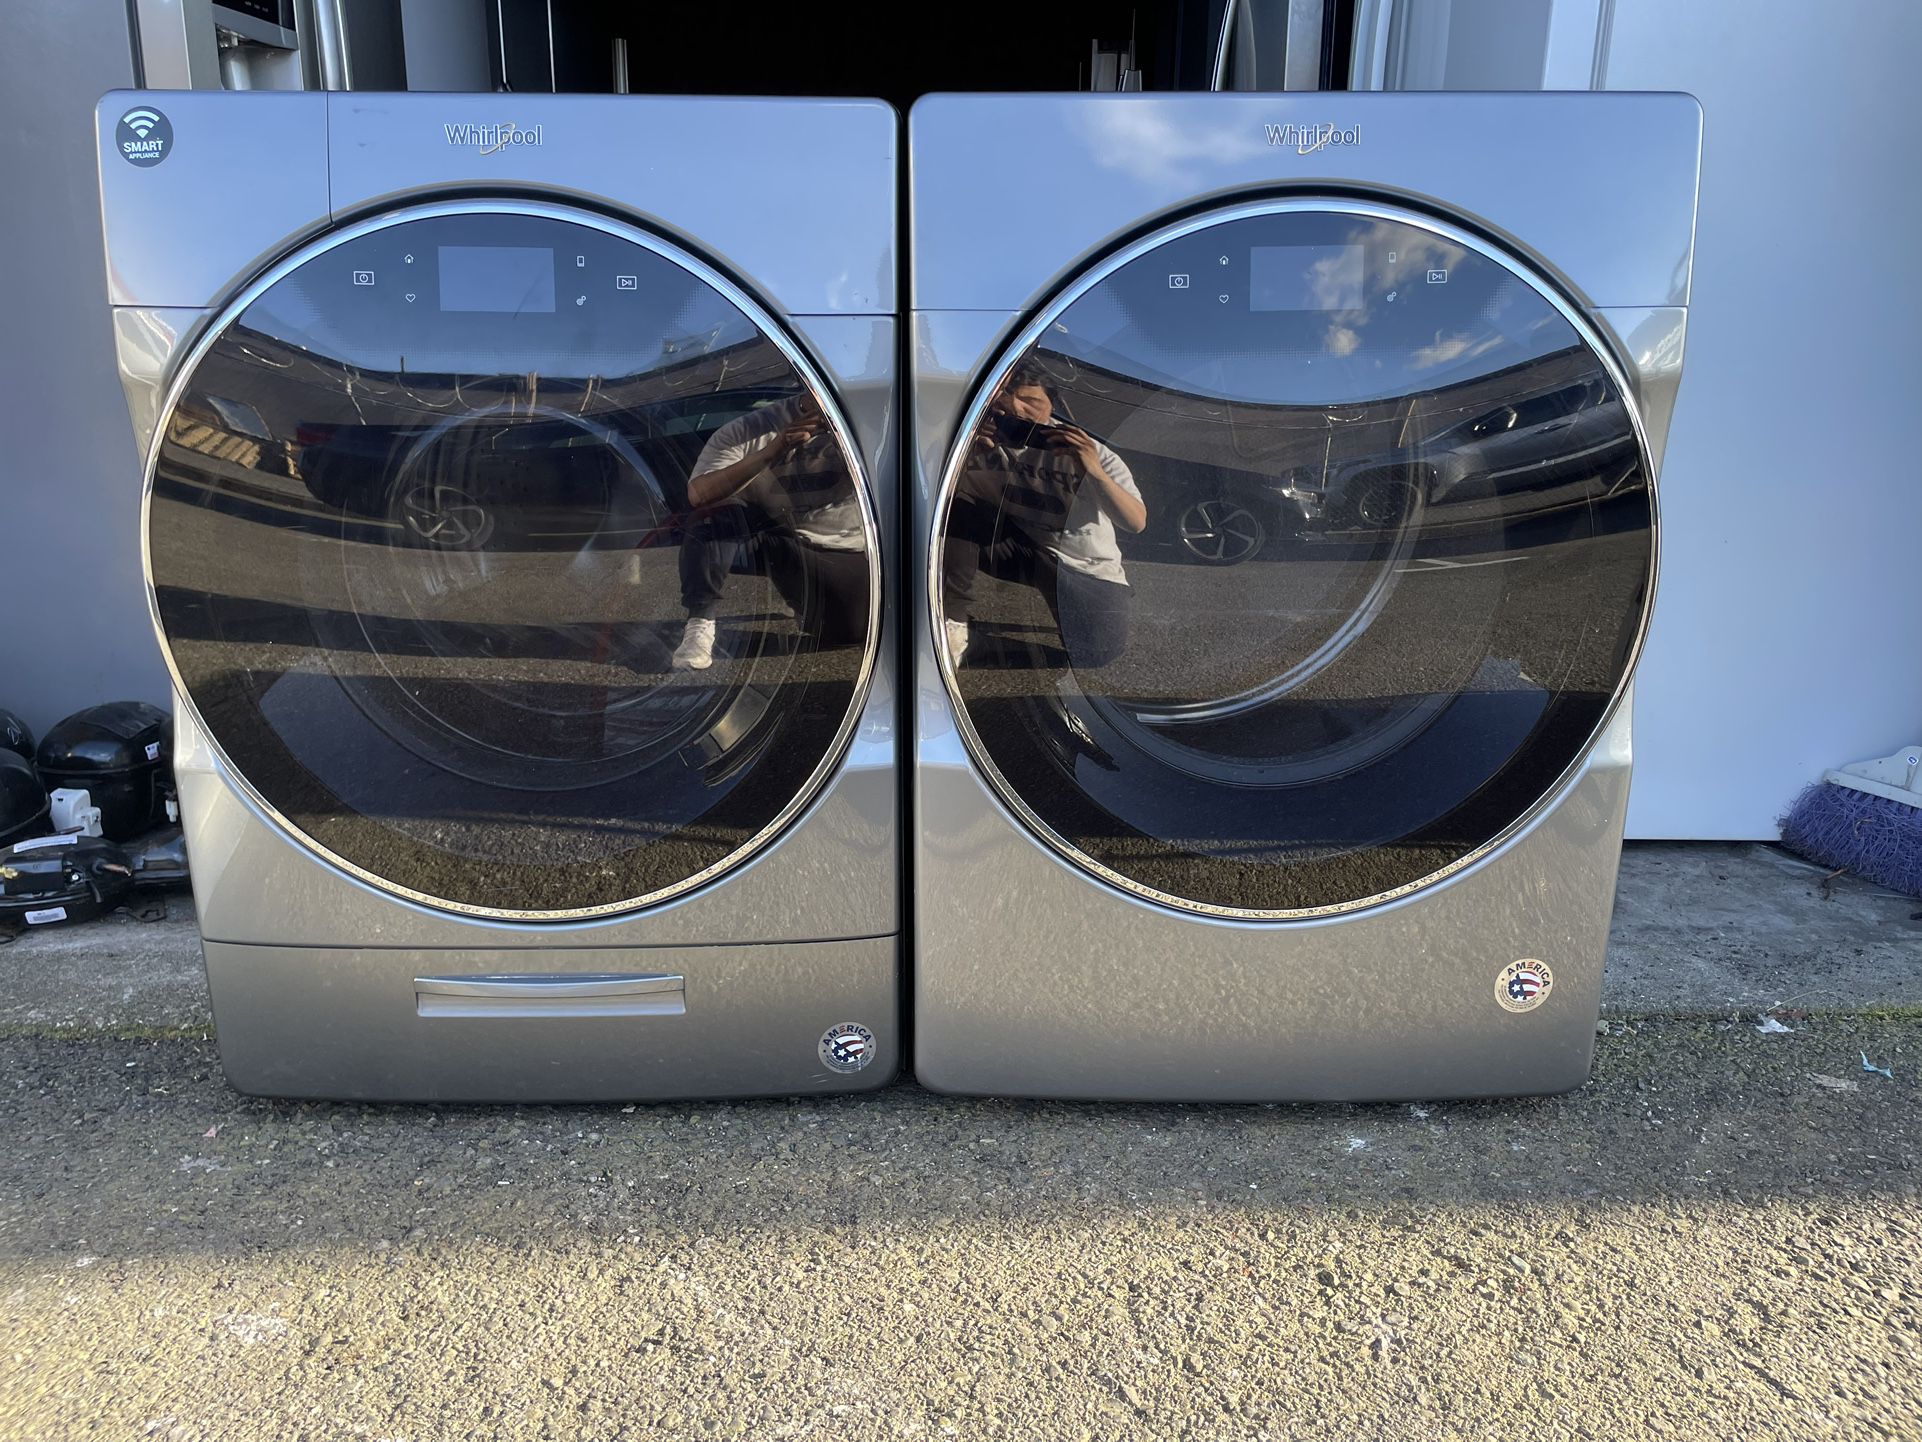 Whirlpool 2019 27 Inch Front Load Washer And Dryer Set 